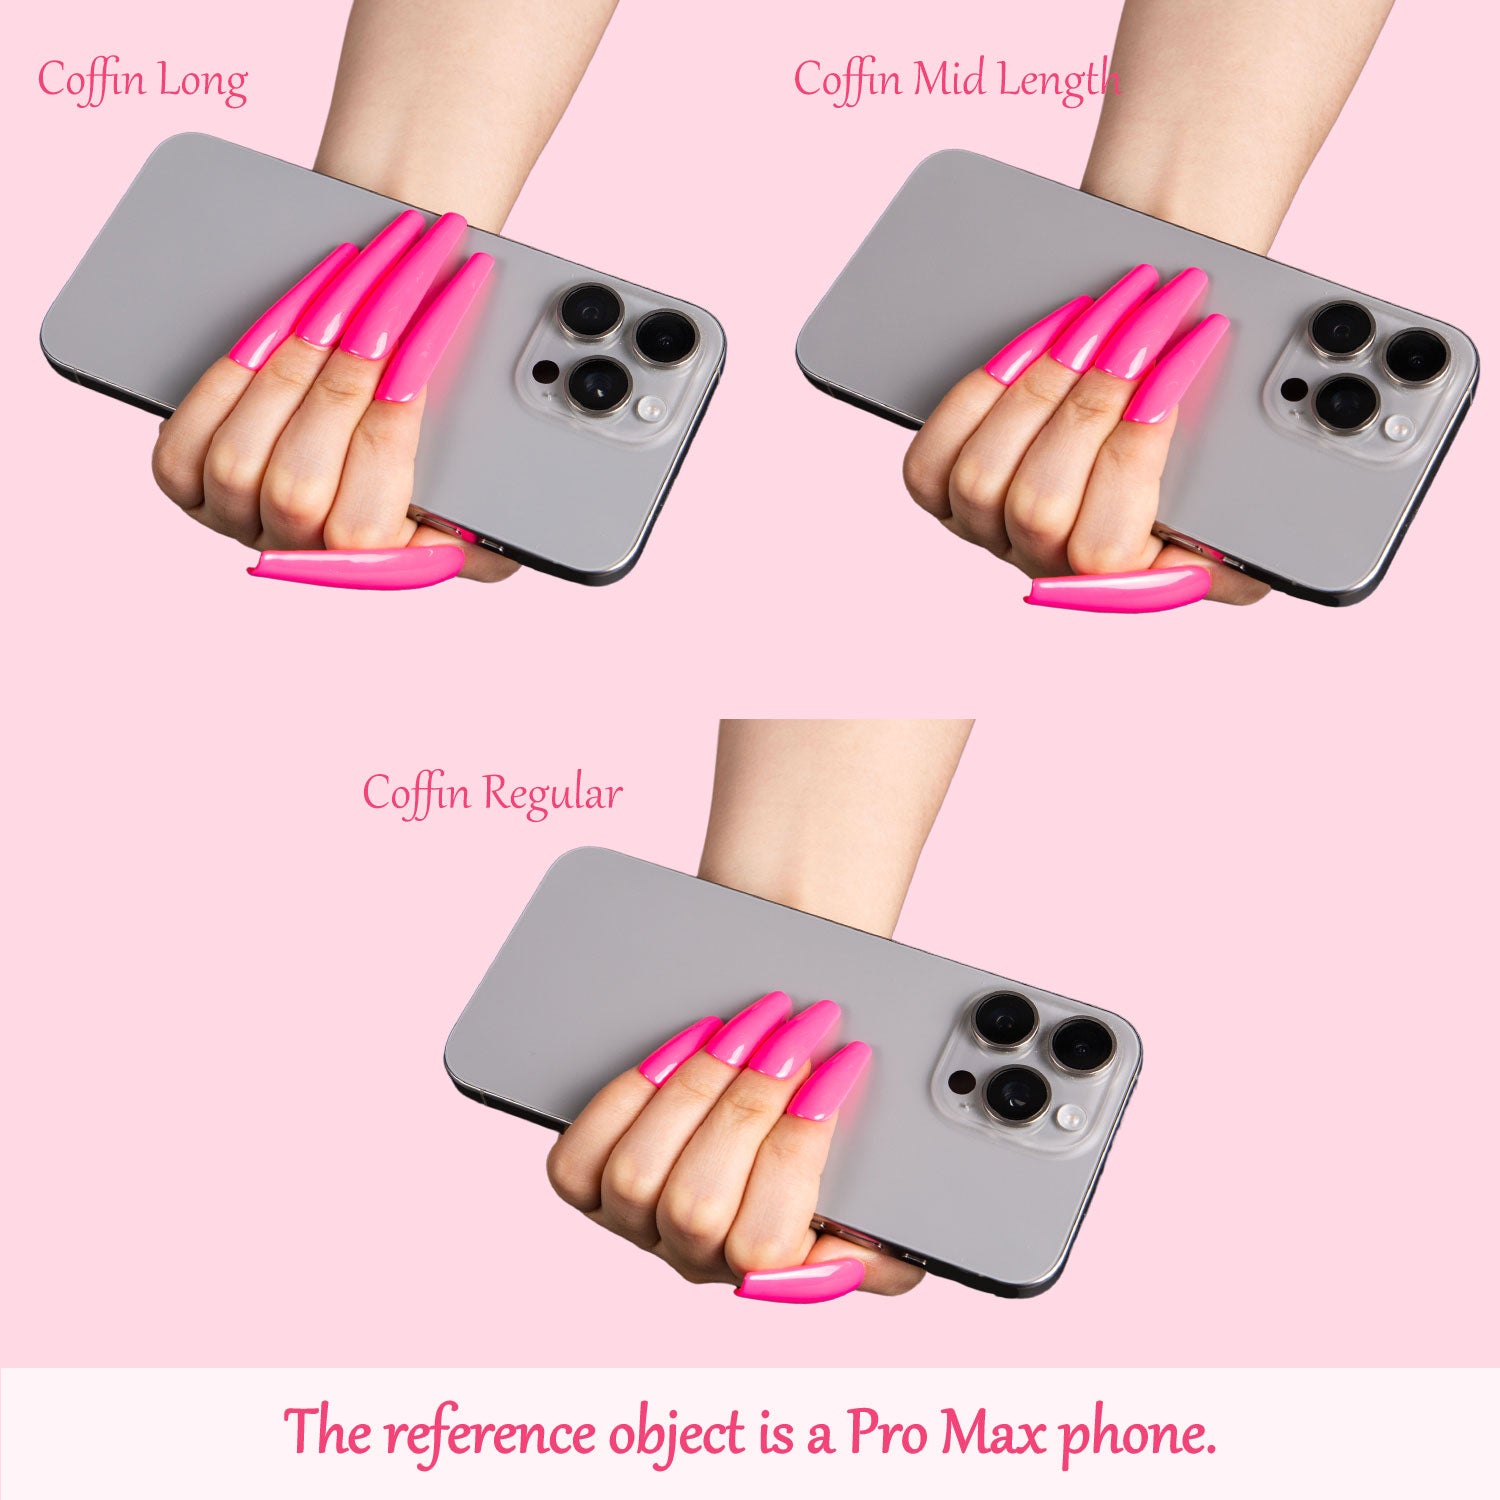 Comparison of neon pink coffin-shaped press-on nails on a Pro Max phone in three lengths: Coffin Long, Coffin Mid Length, and Coffin Regular.